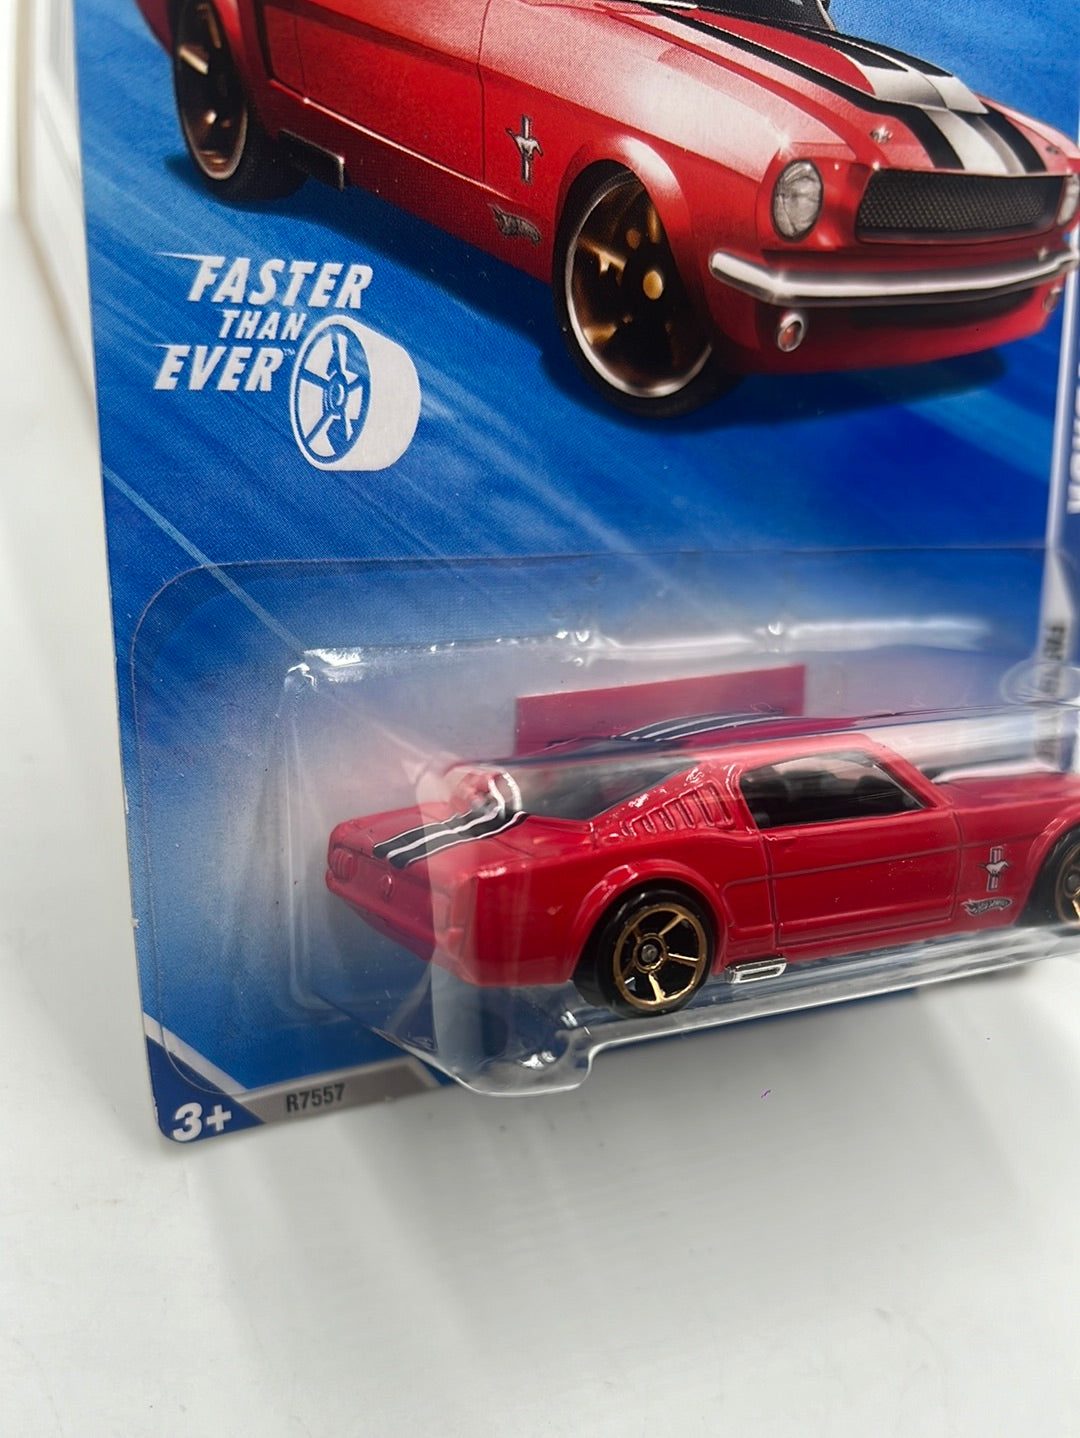 2010 Hot Wheels Faster Than Ever Ford Mustang Fastback Red Keys to Speed 132/240 25H